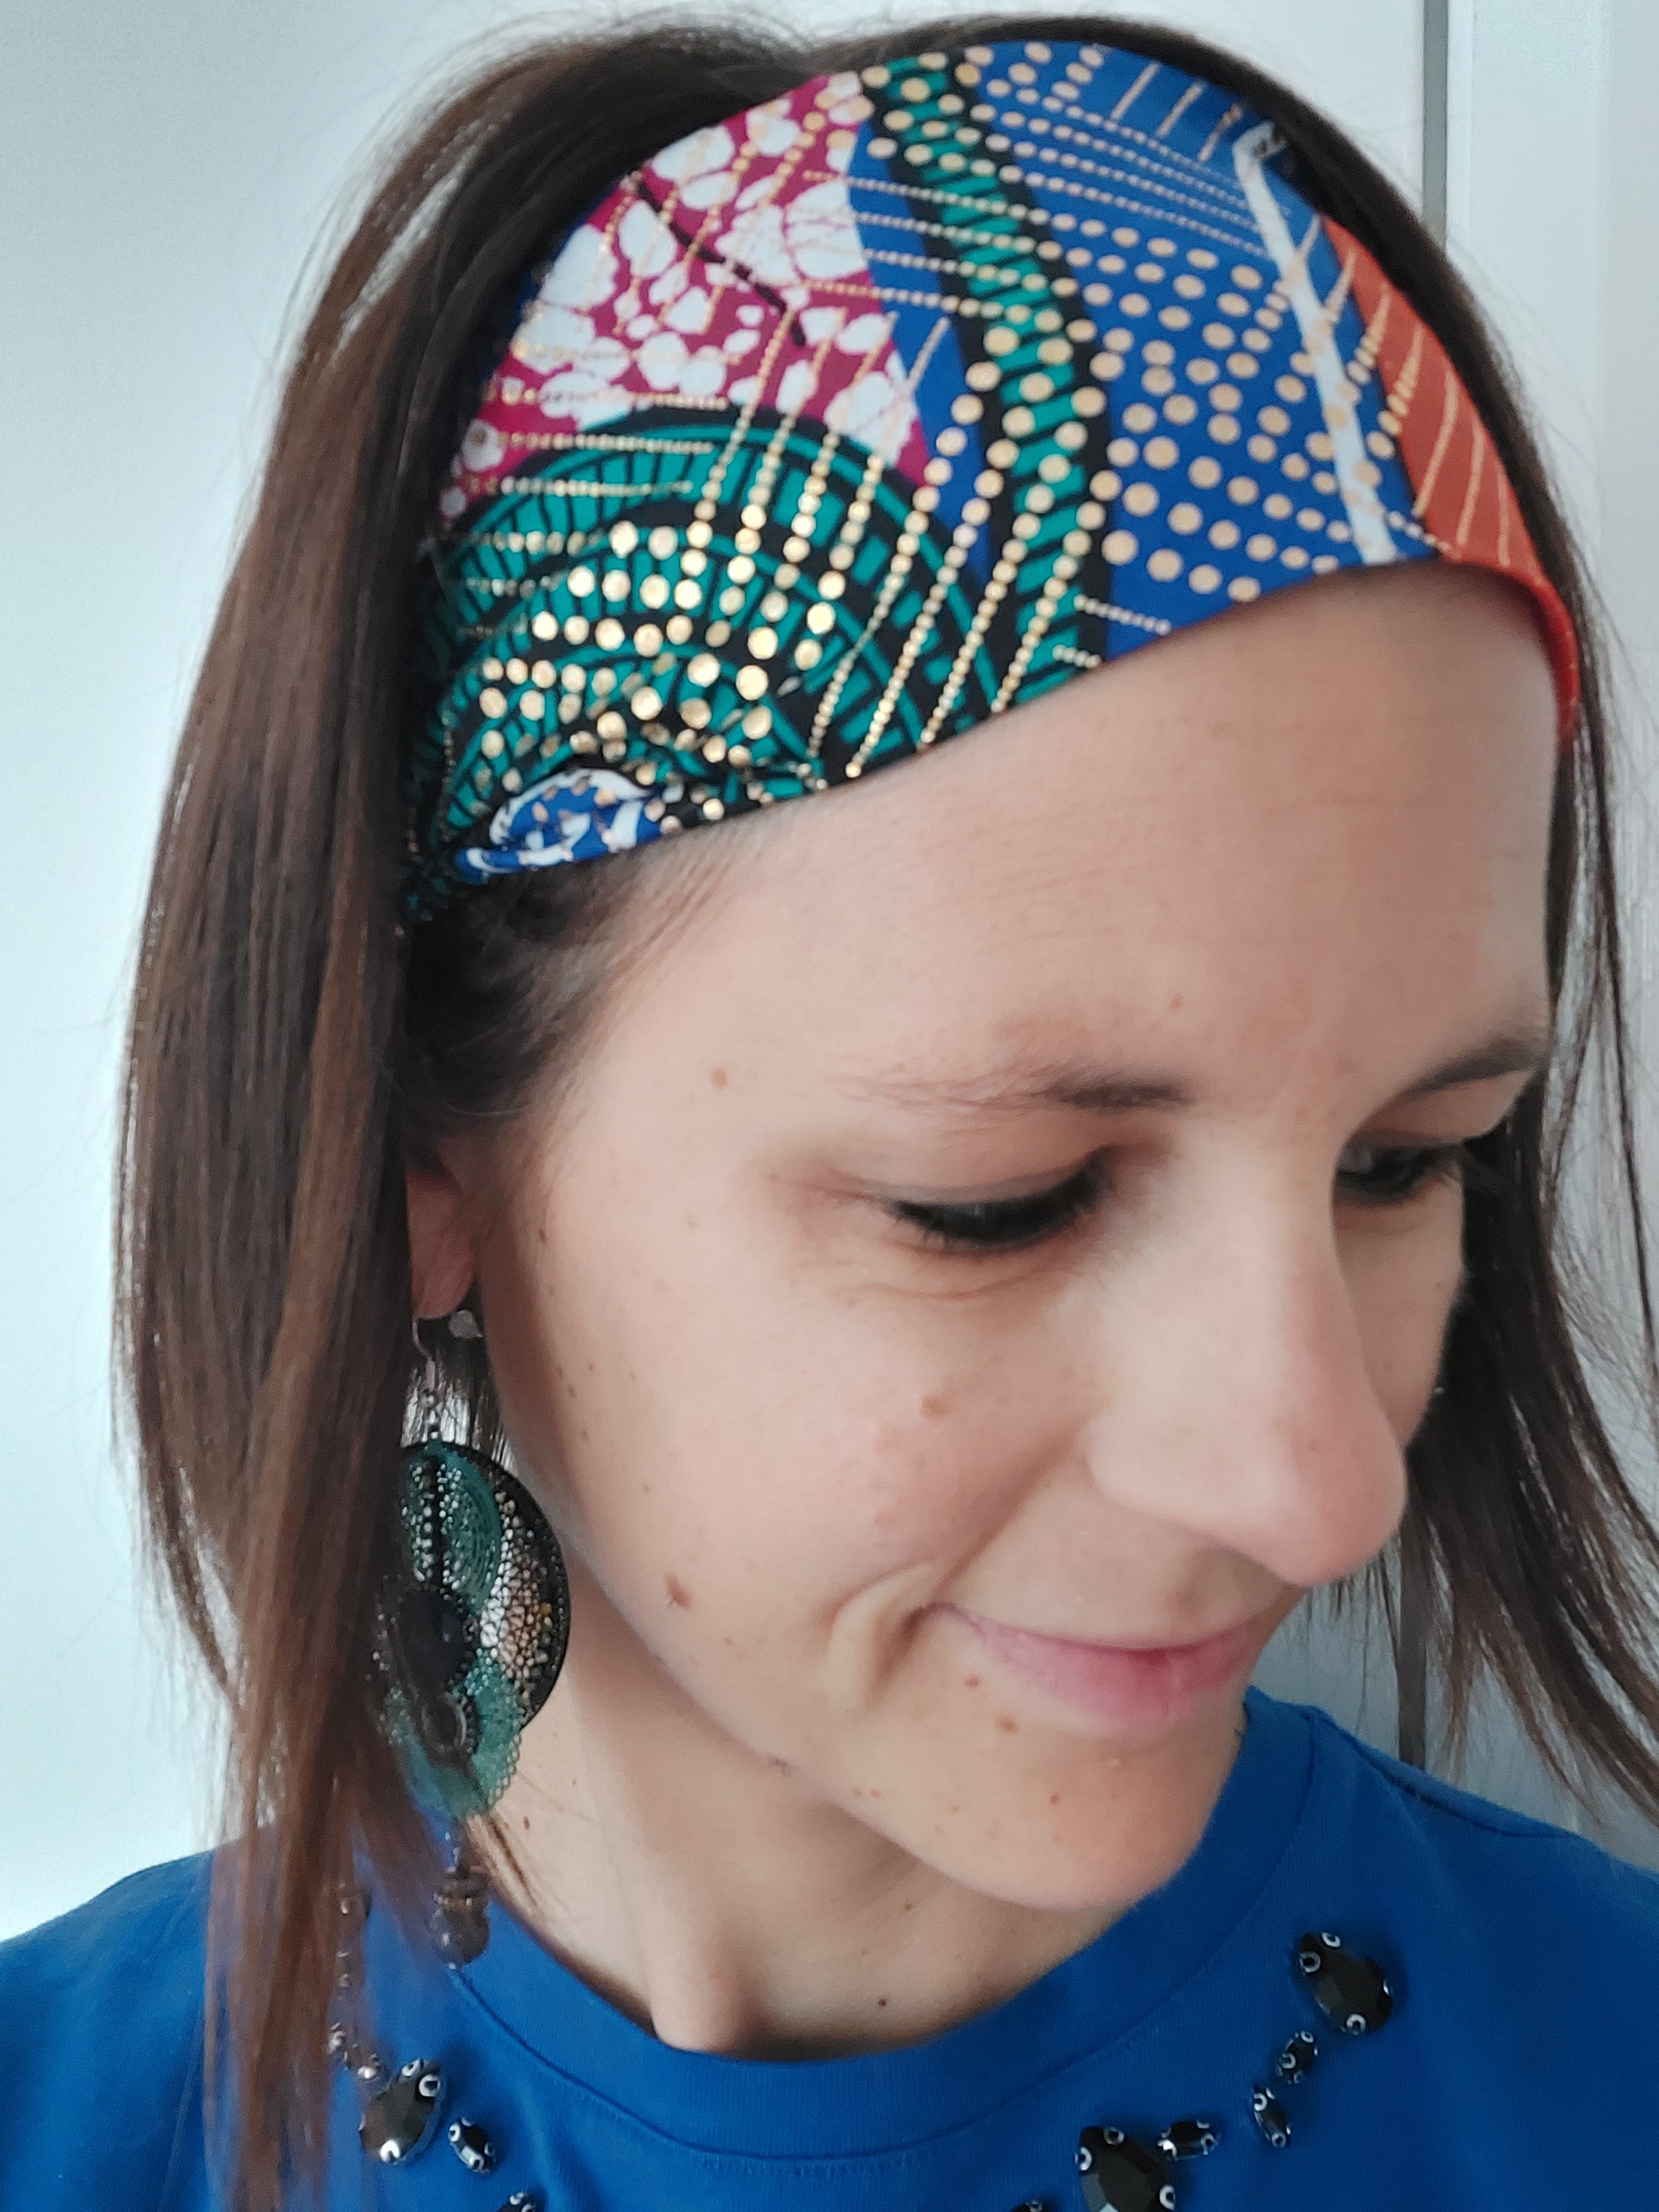 The colorful headbands